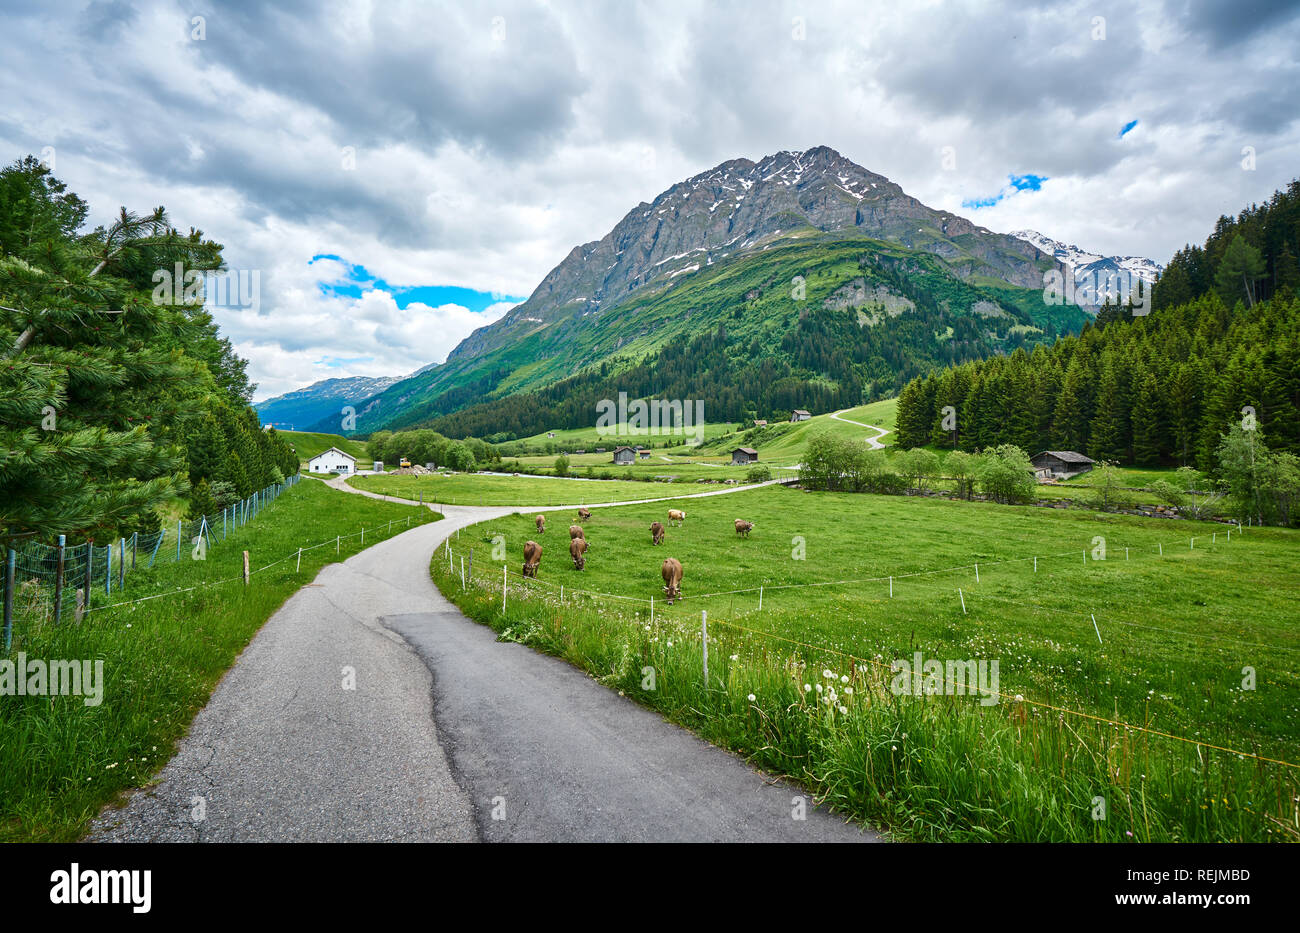 Road side Swis Alps landscape with meadow river and cows in canton of Graubünden, Switzerland Stock Photo